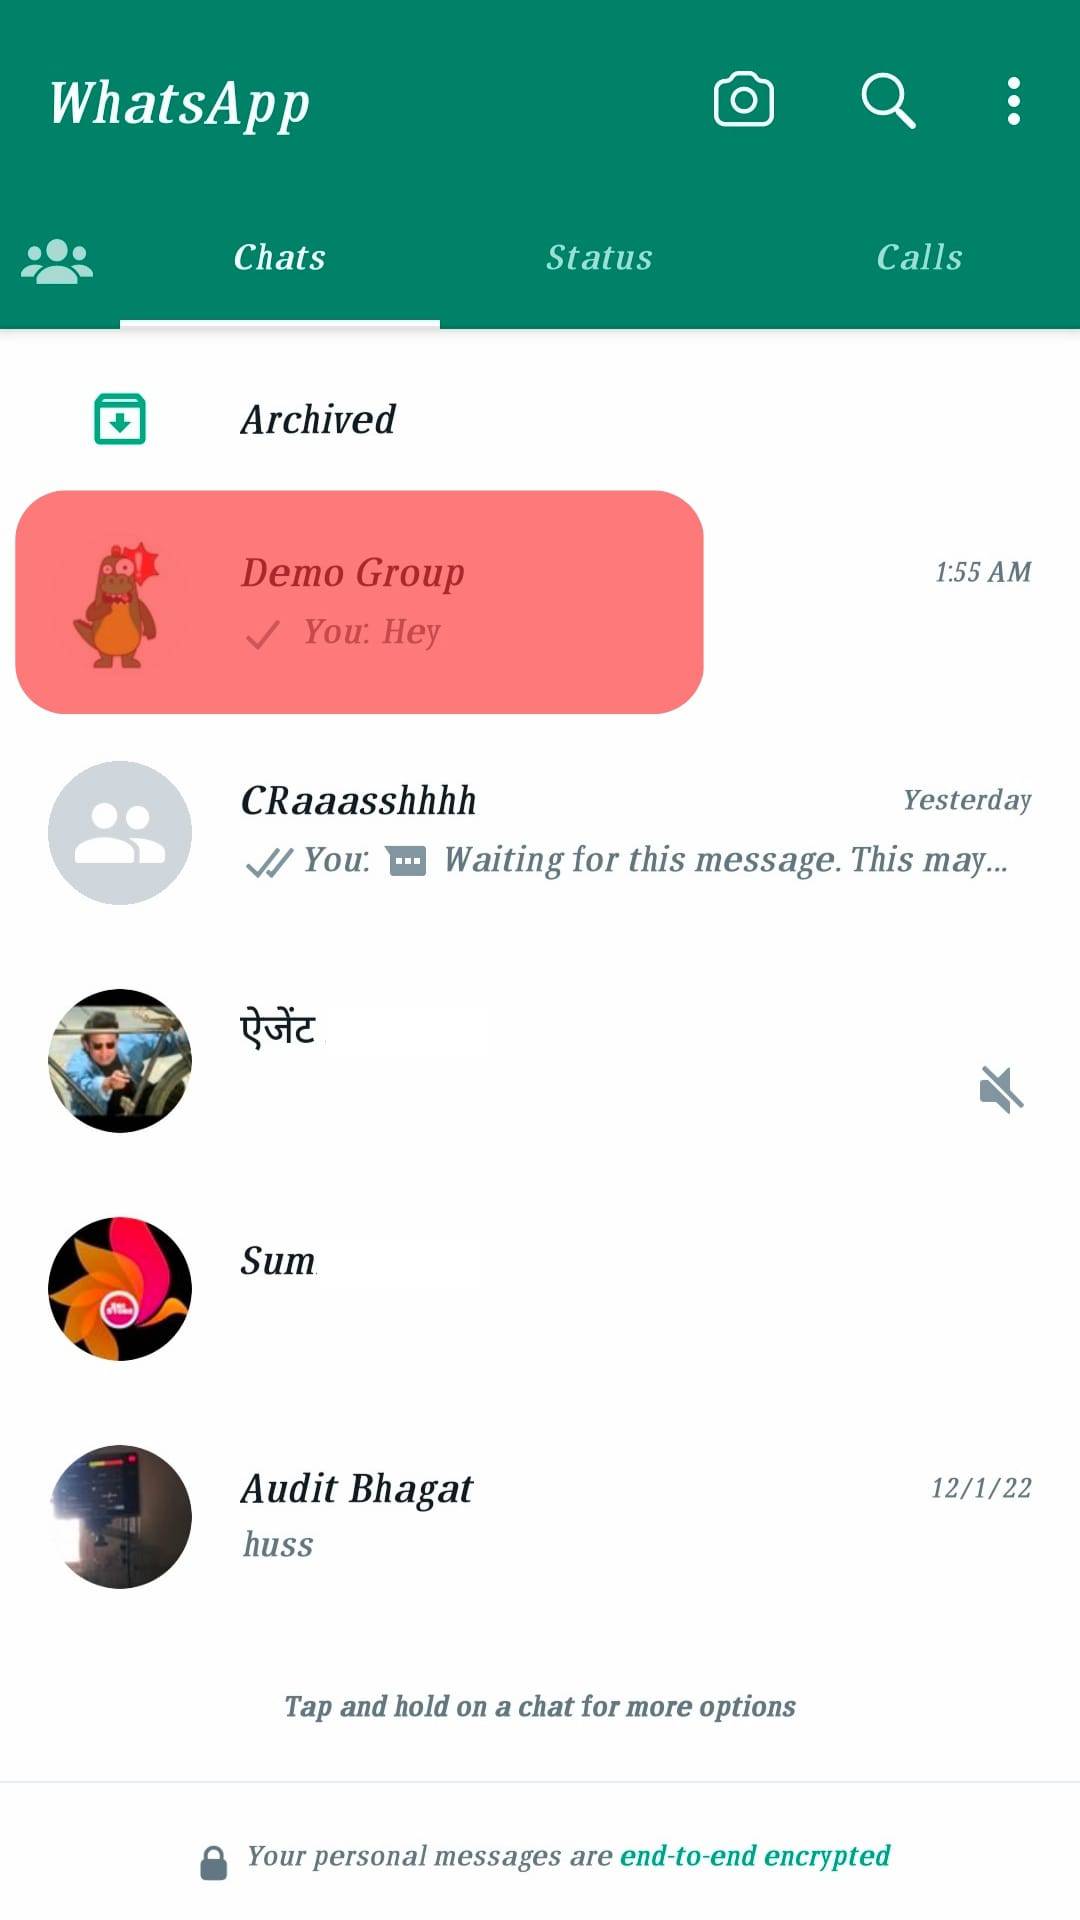 Scroll Down The Conversations To Find Group Chat